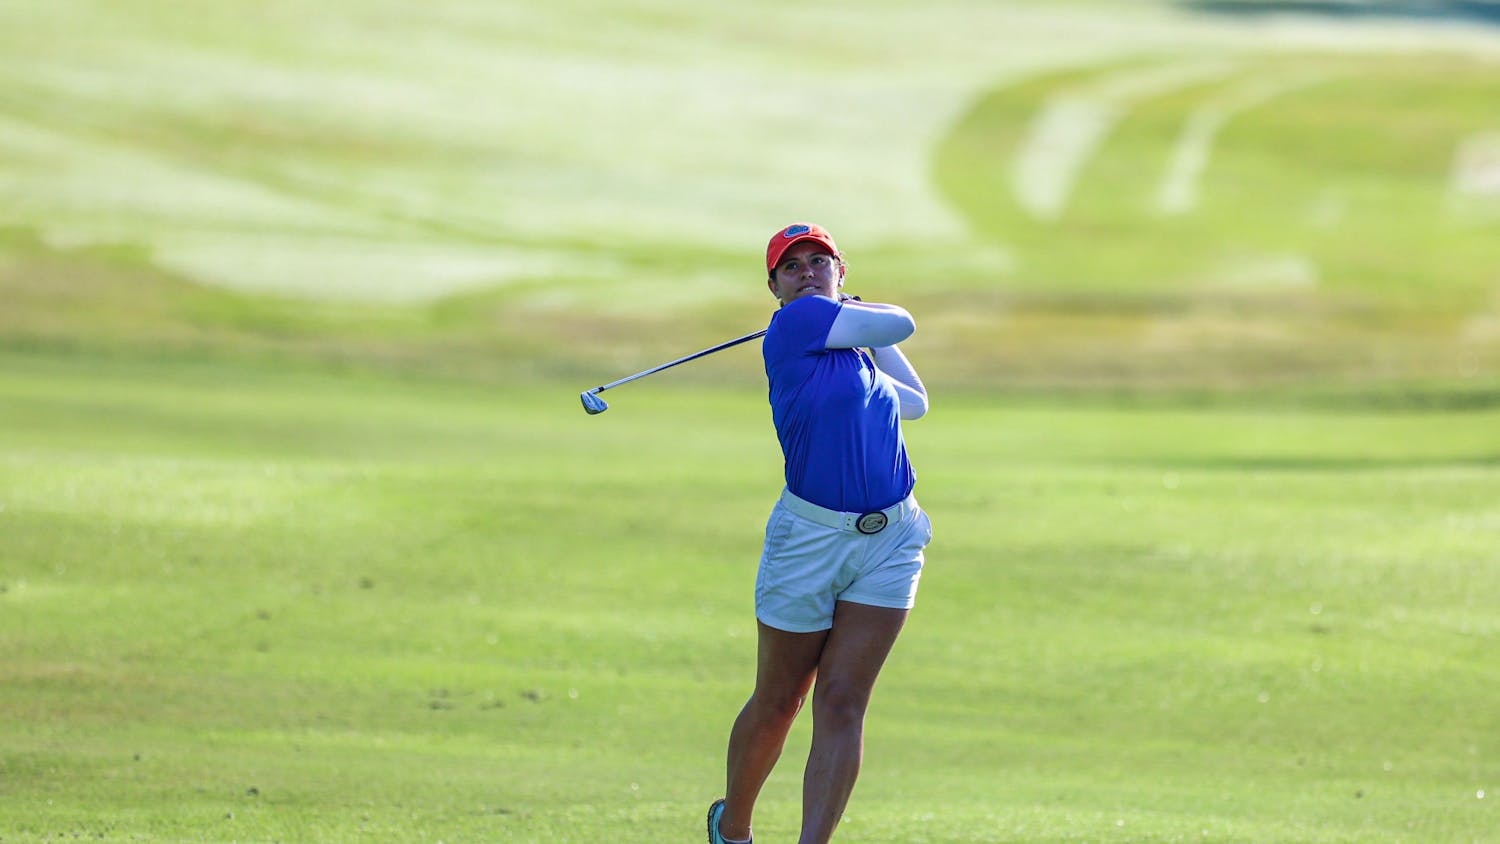 Florida senior golfer Jackie Lucena swings her club in round 3 of The "Mo" Morial Invitational Wednesday, Sept. 21, 2022.